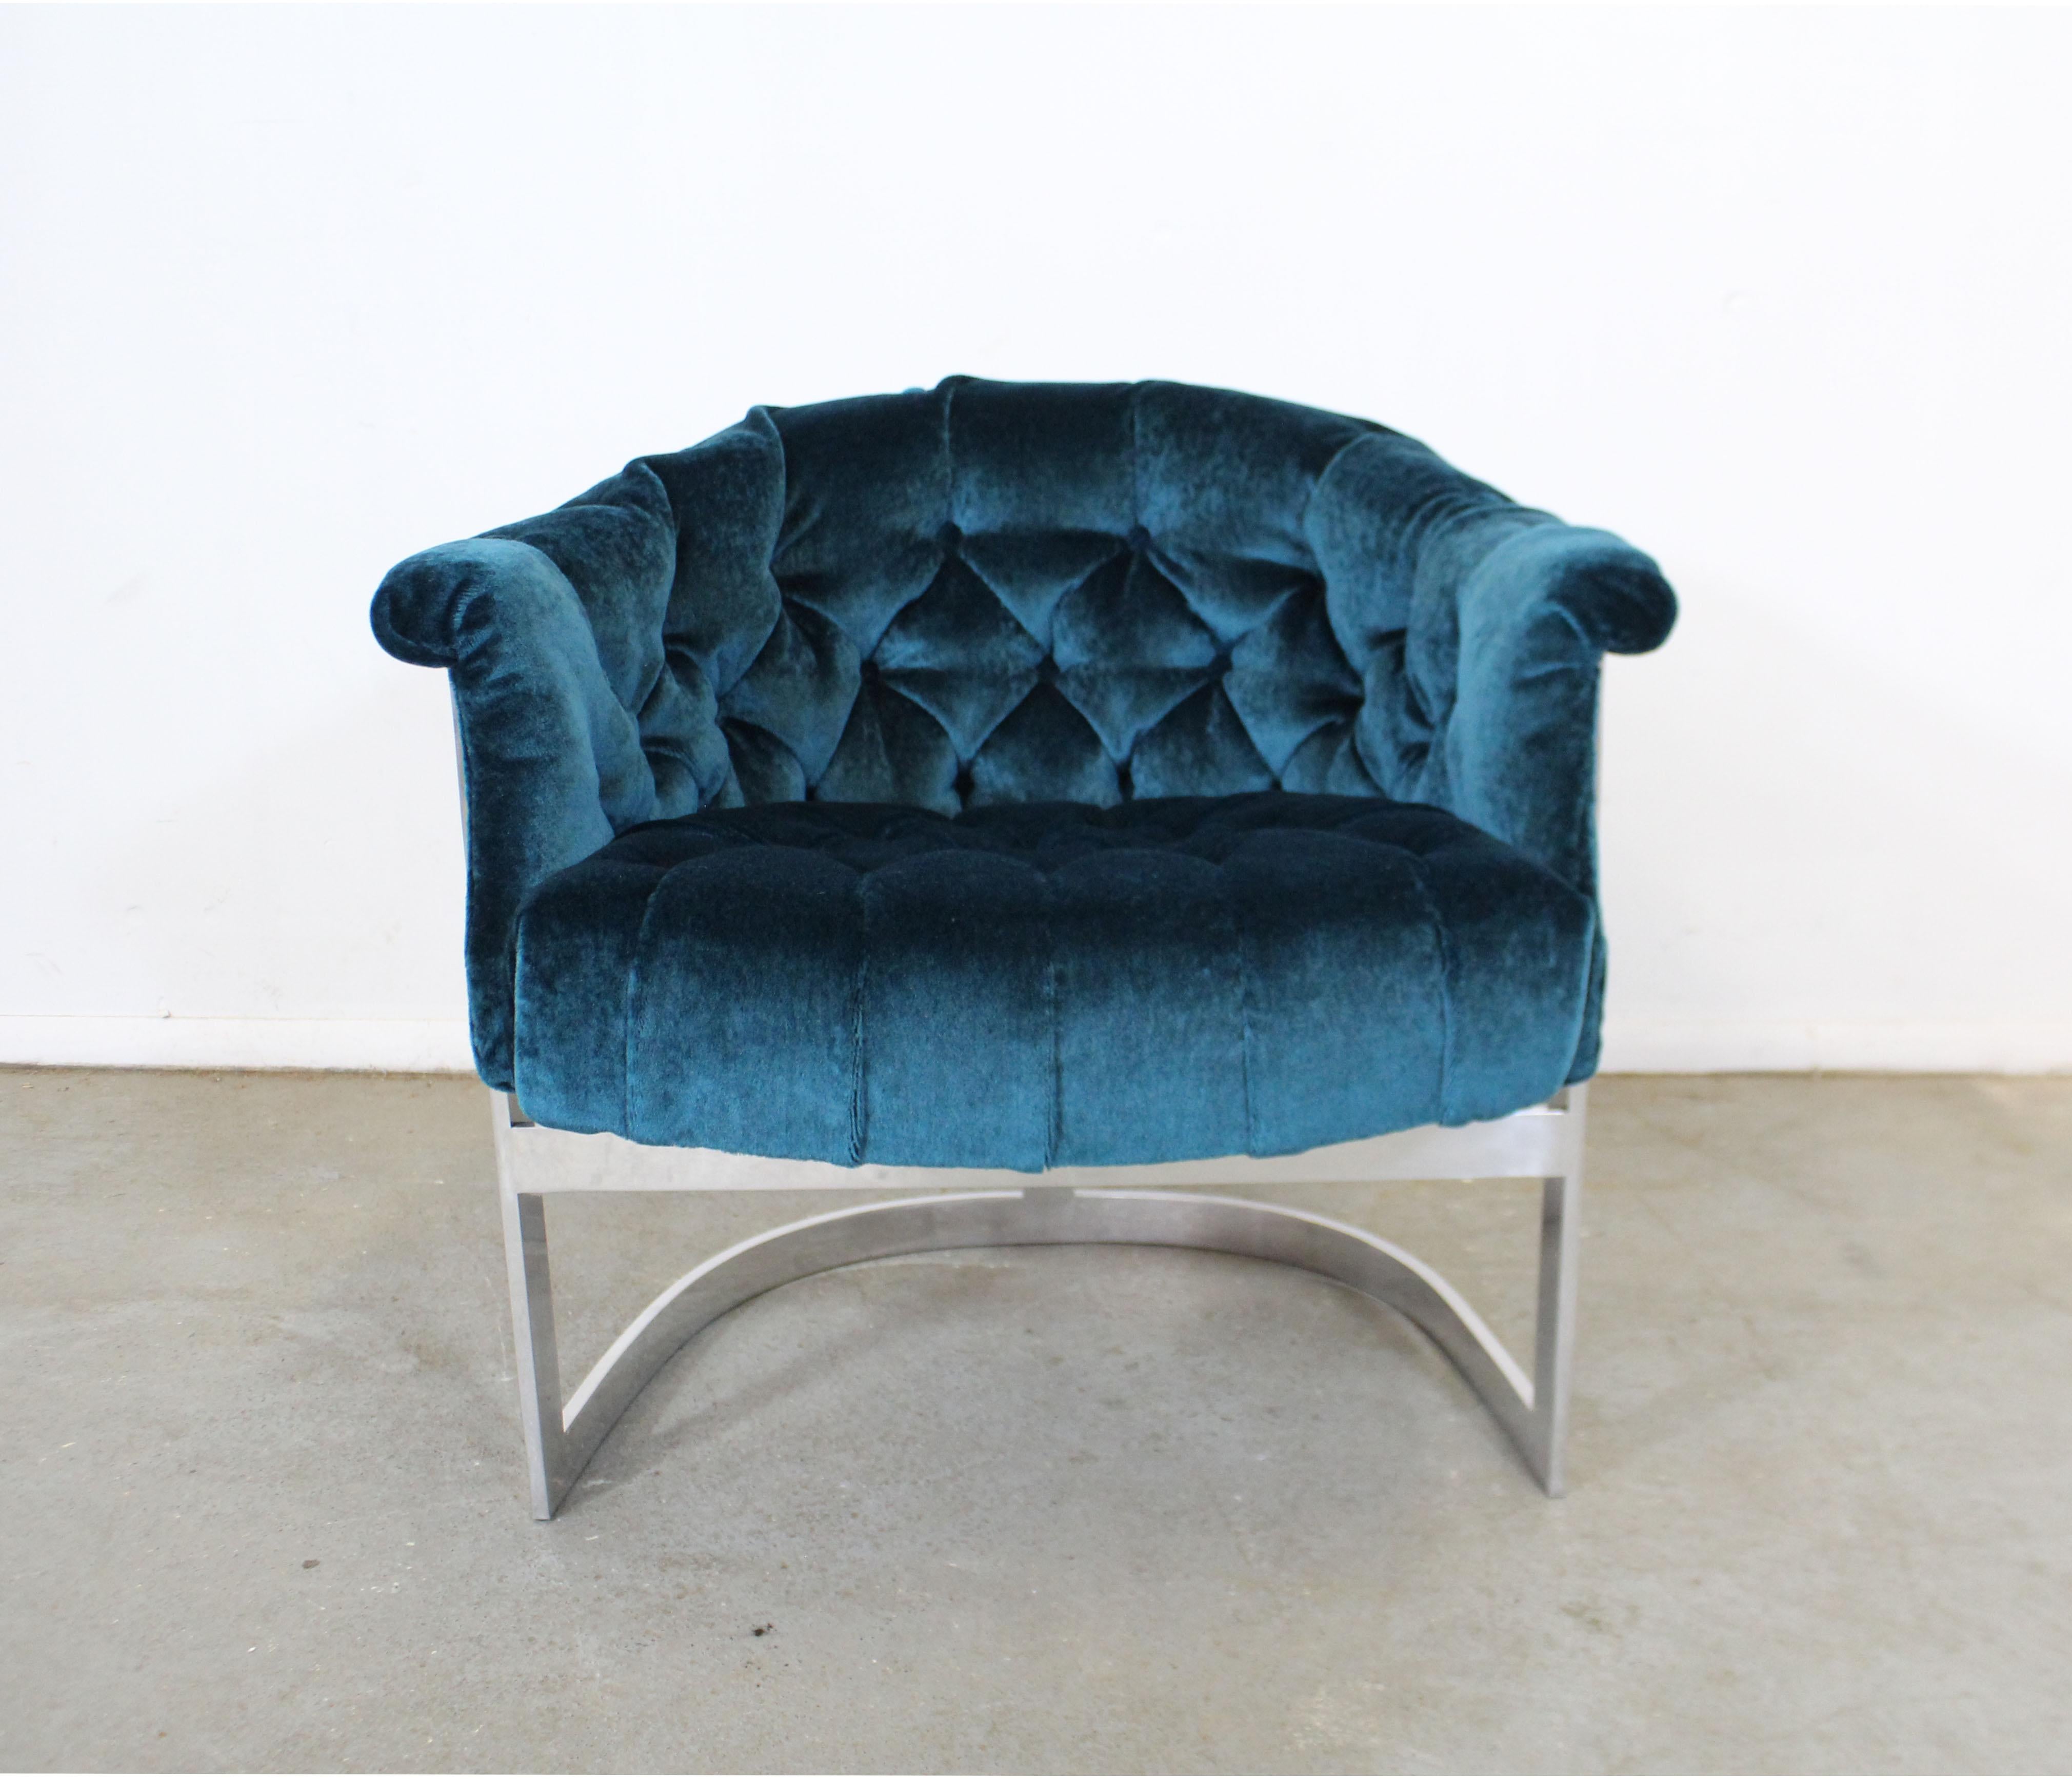 Offered is a beautifully restored vintage Mid-Century Modern lounge chair by John Stuart. This chair has been reupholstered with Jim Thompson 'Peacock' crushed velvet fabric. Features a steel base and tufted seat and back. In excellent restored